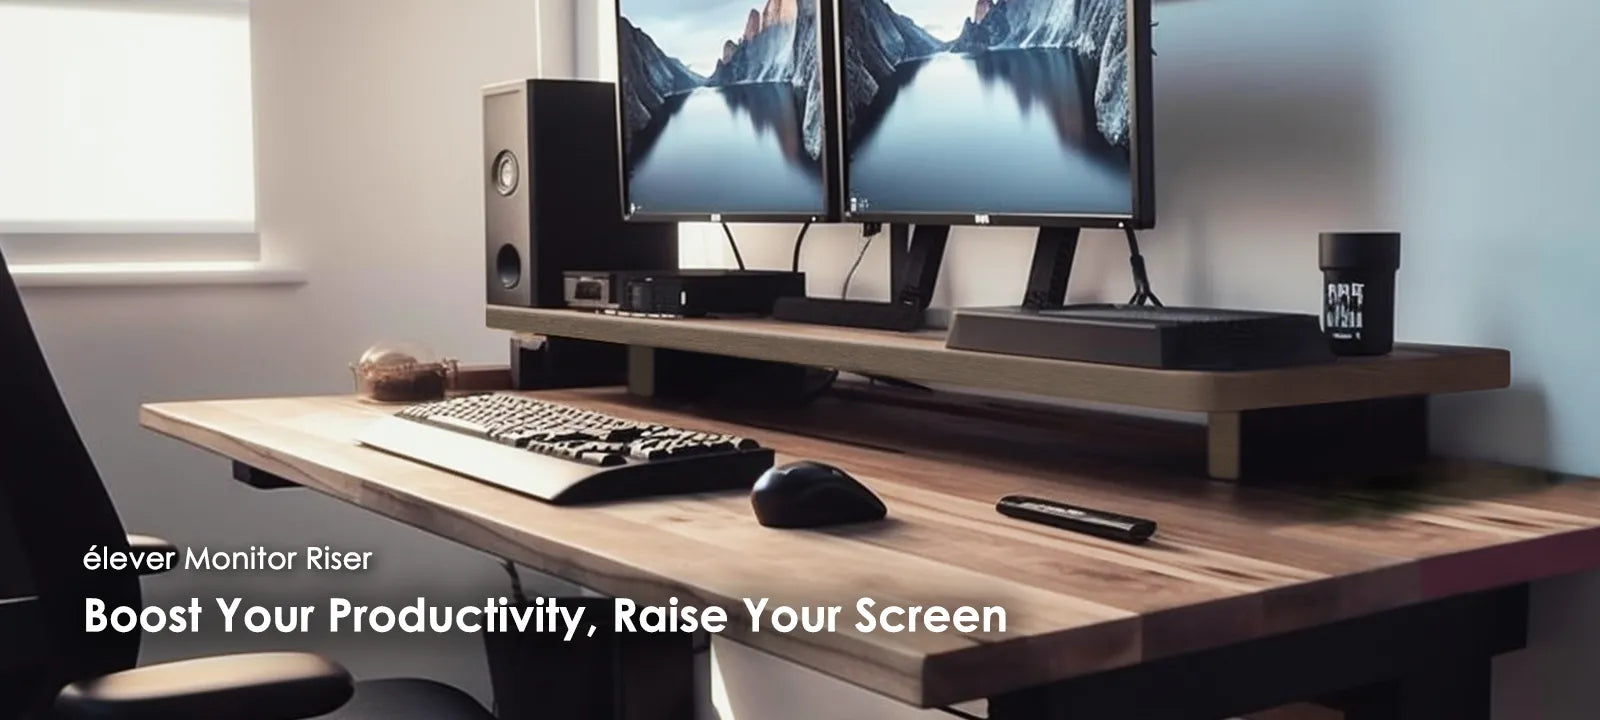 Boost Your Productivity, Raise Your Screen": "An ergonomic workspace featuring the éléver Monitor Riser with two monitors, a keyboard, and a speaker, emphasizing increased productivity.